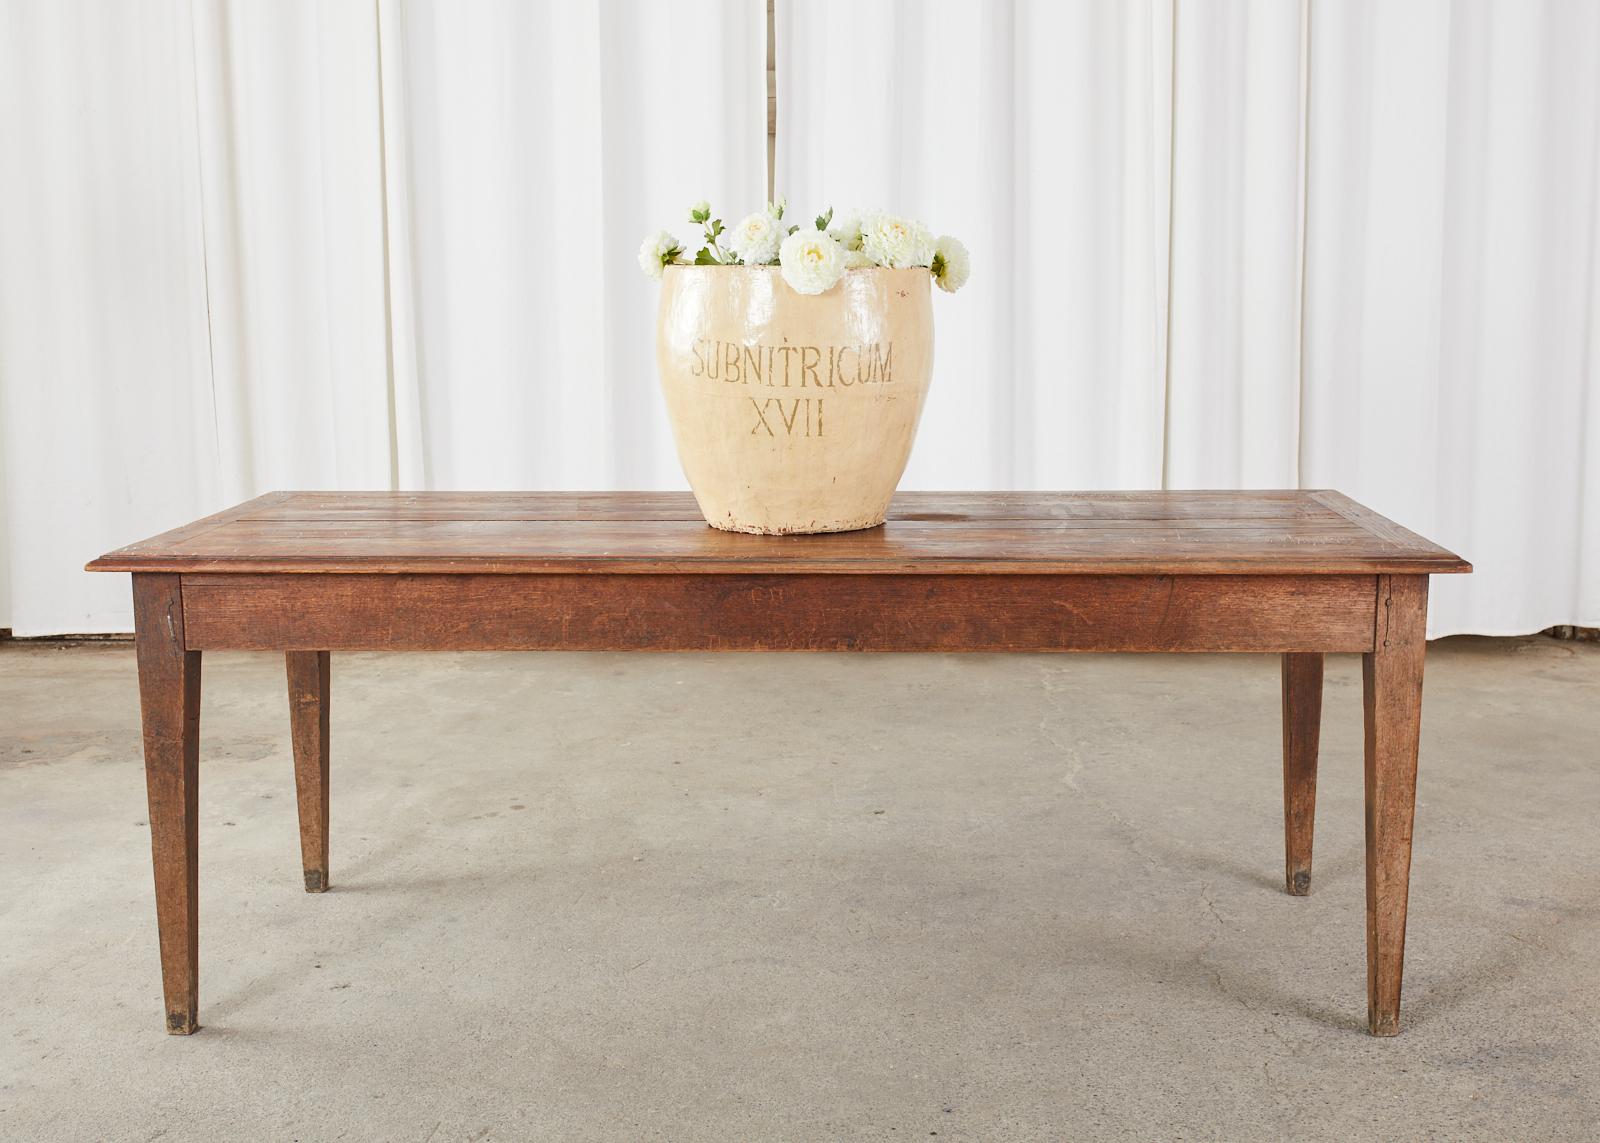 Rustic country French farmhouse harvest table or dining table crafted from pine and oak. The table features a framed plank top made of pine with an ogee edge. The base appears to be crafted from oak with wood peg joinery. Ample leg room measuring